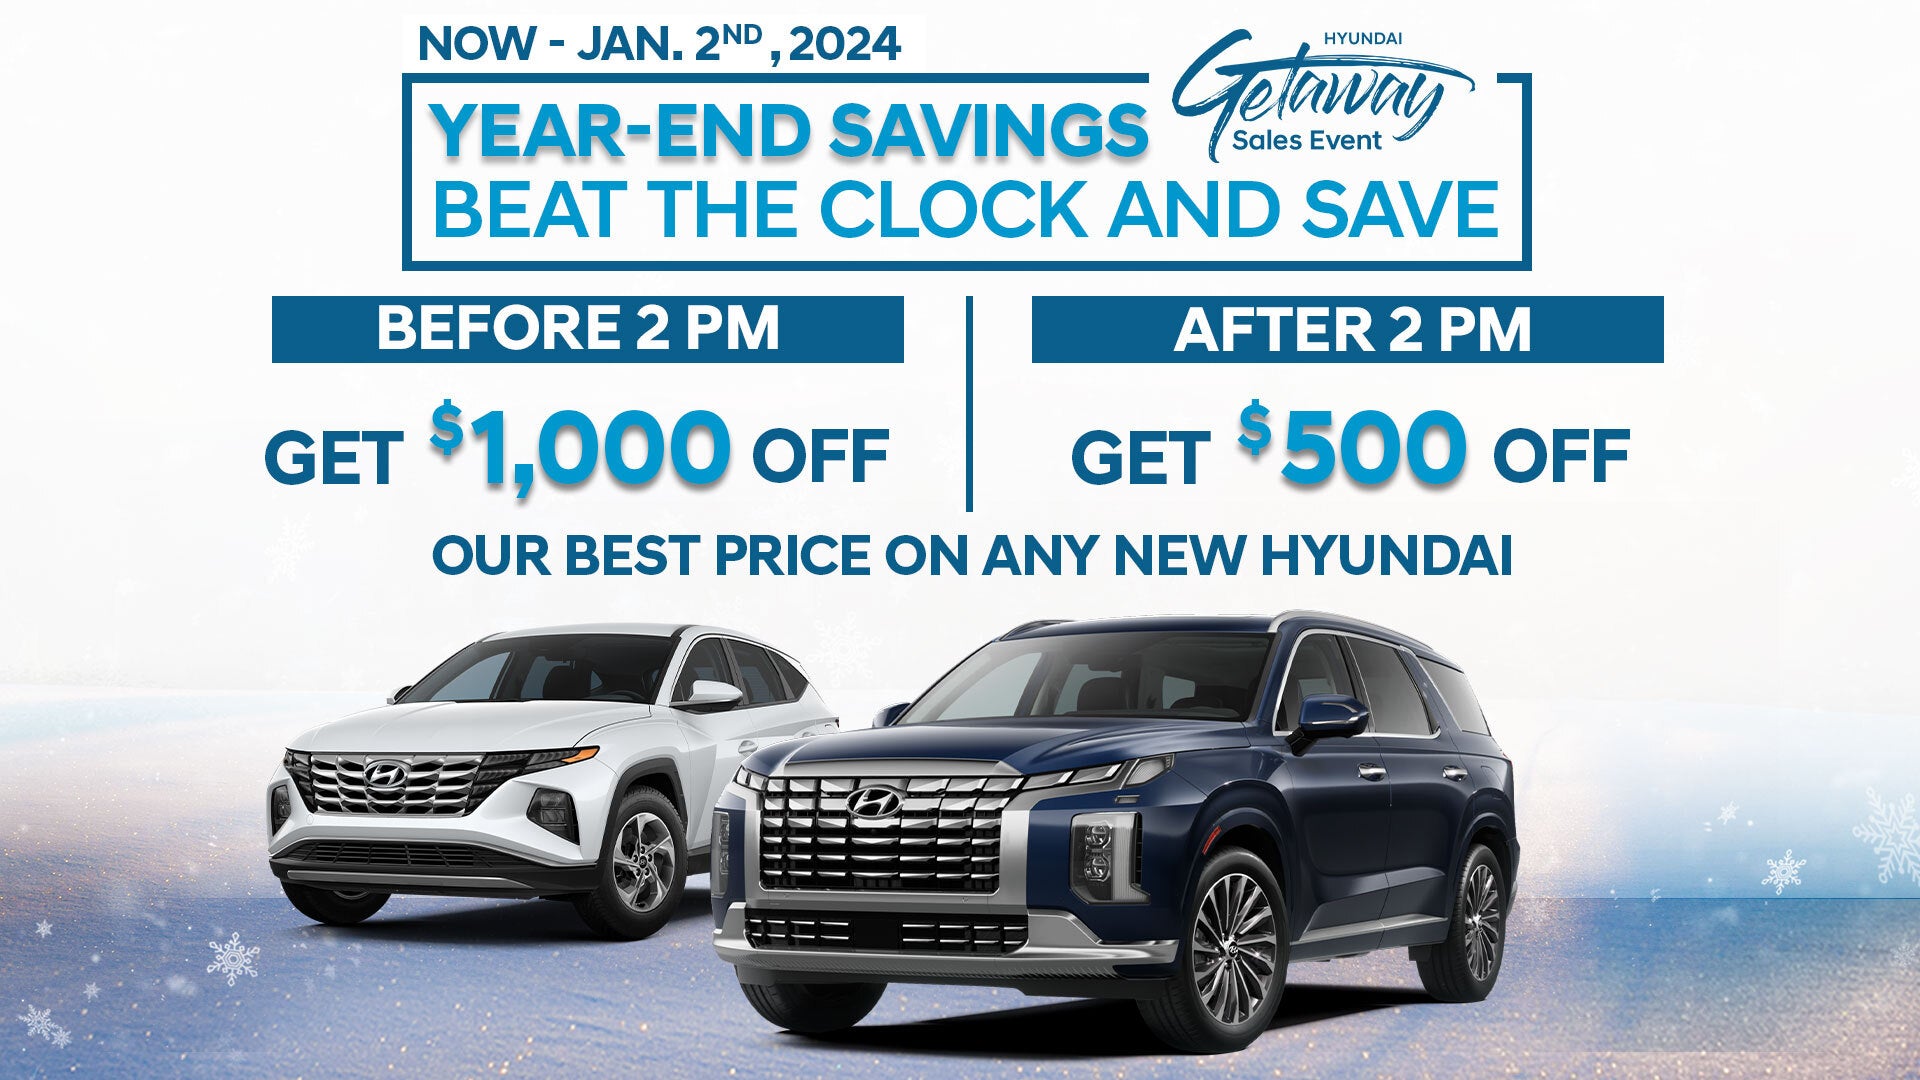 Now through January 2nd, 2024. Year End Savings, beat the clock and save. Before 2pm, save $1,000 off Our Best Price on any new Hyundai. After 2pm save $500 off Our Best Price on any new Hyundai.